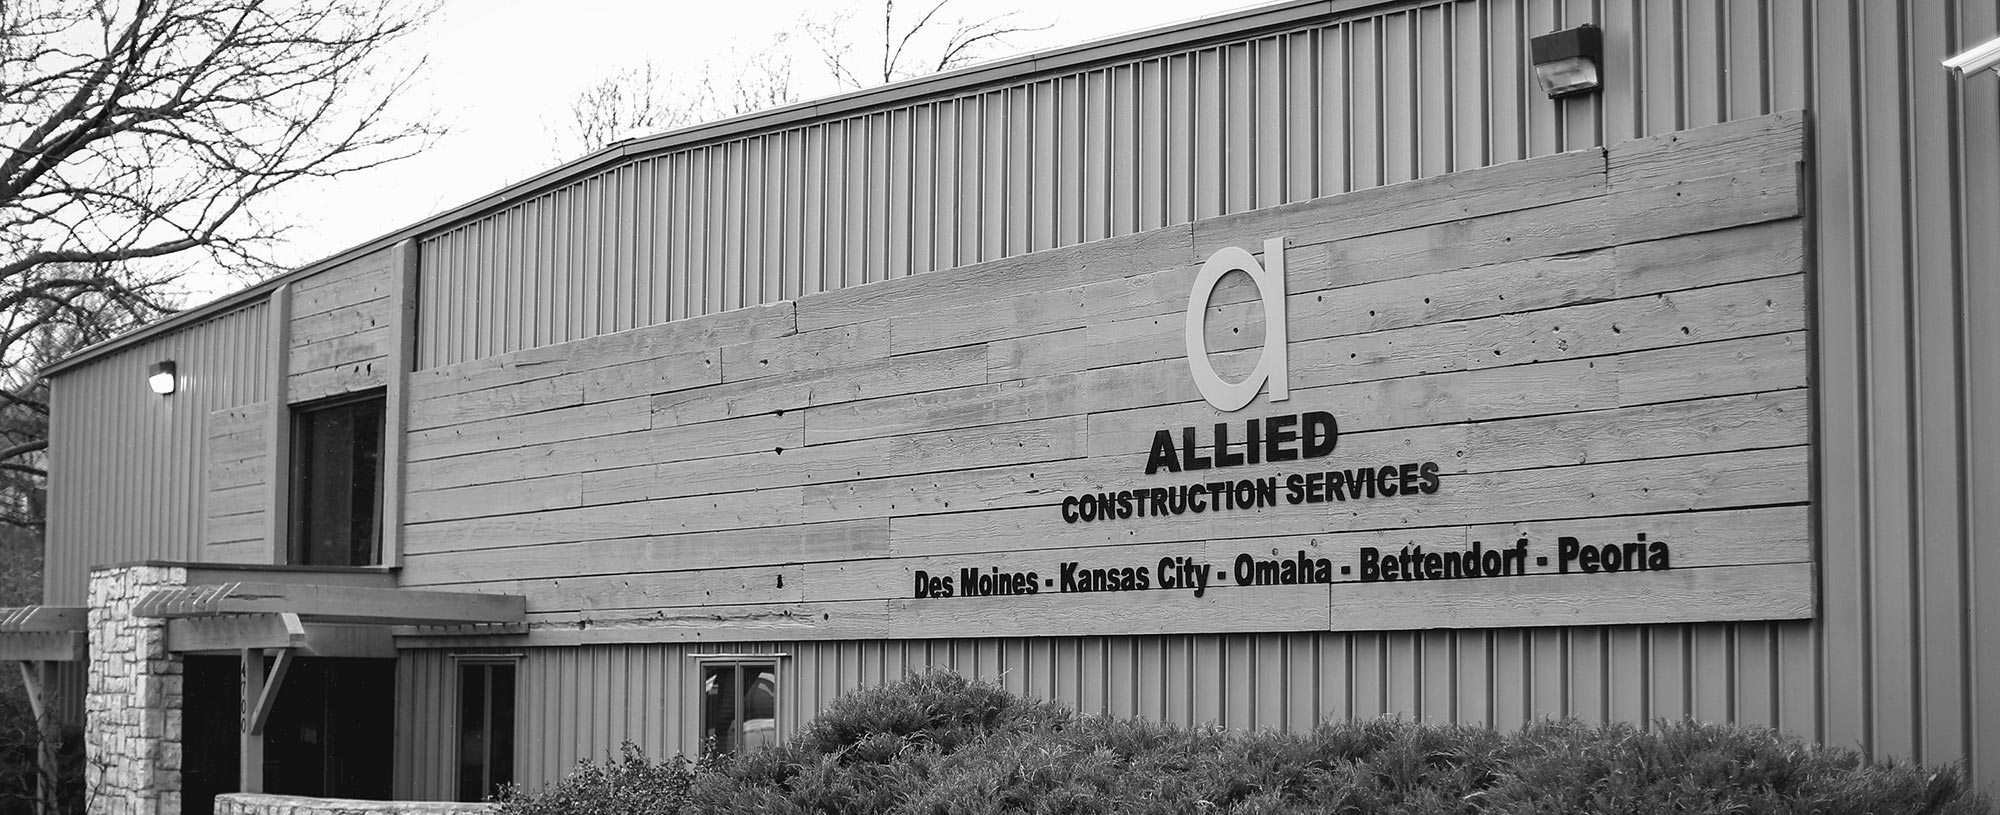 Allied Construction Services